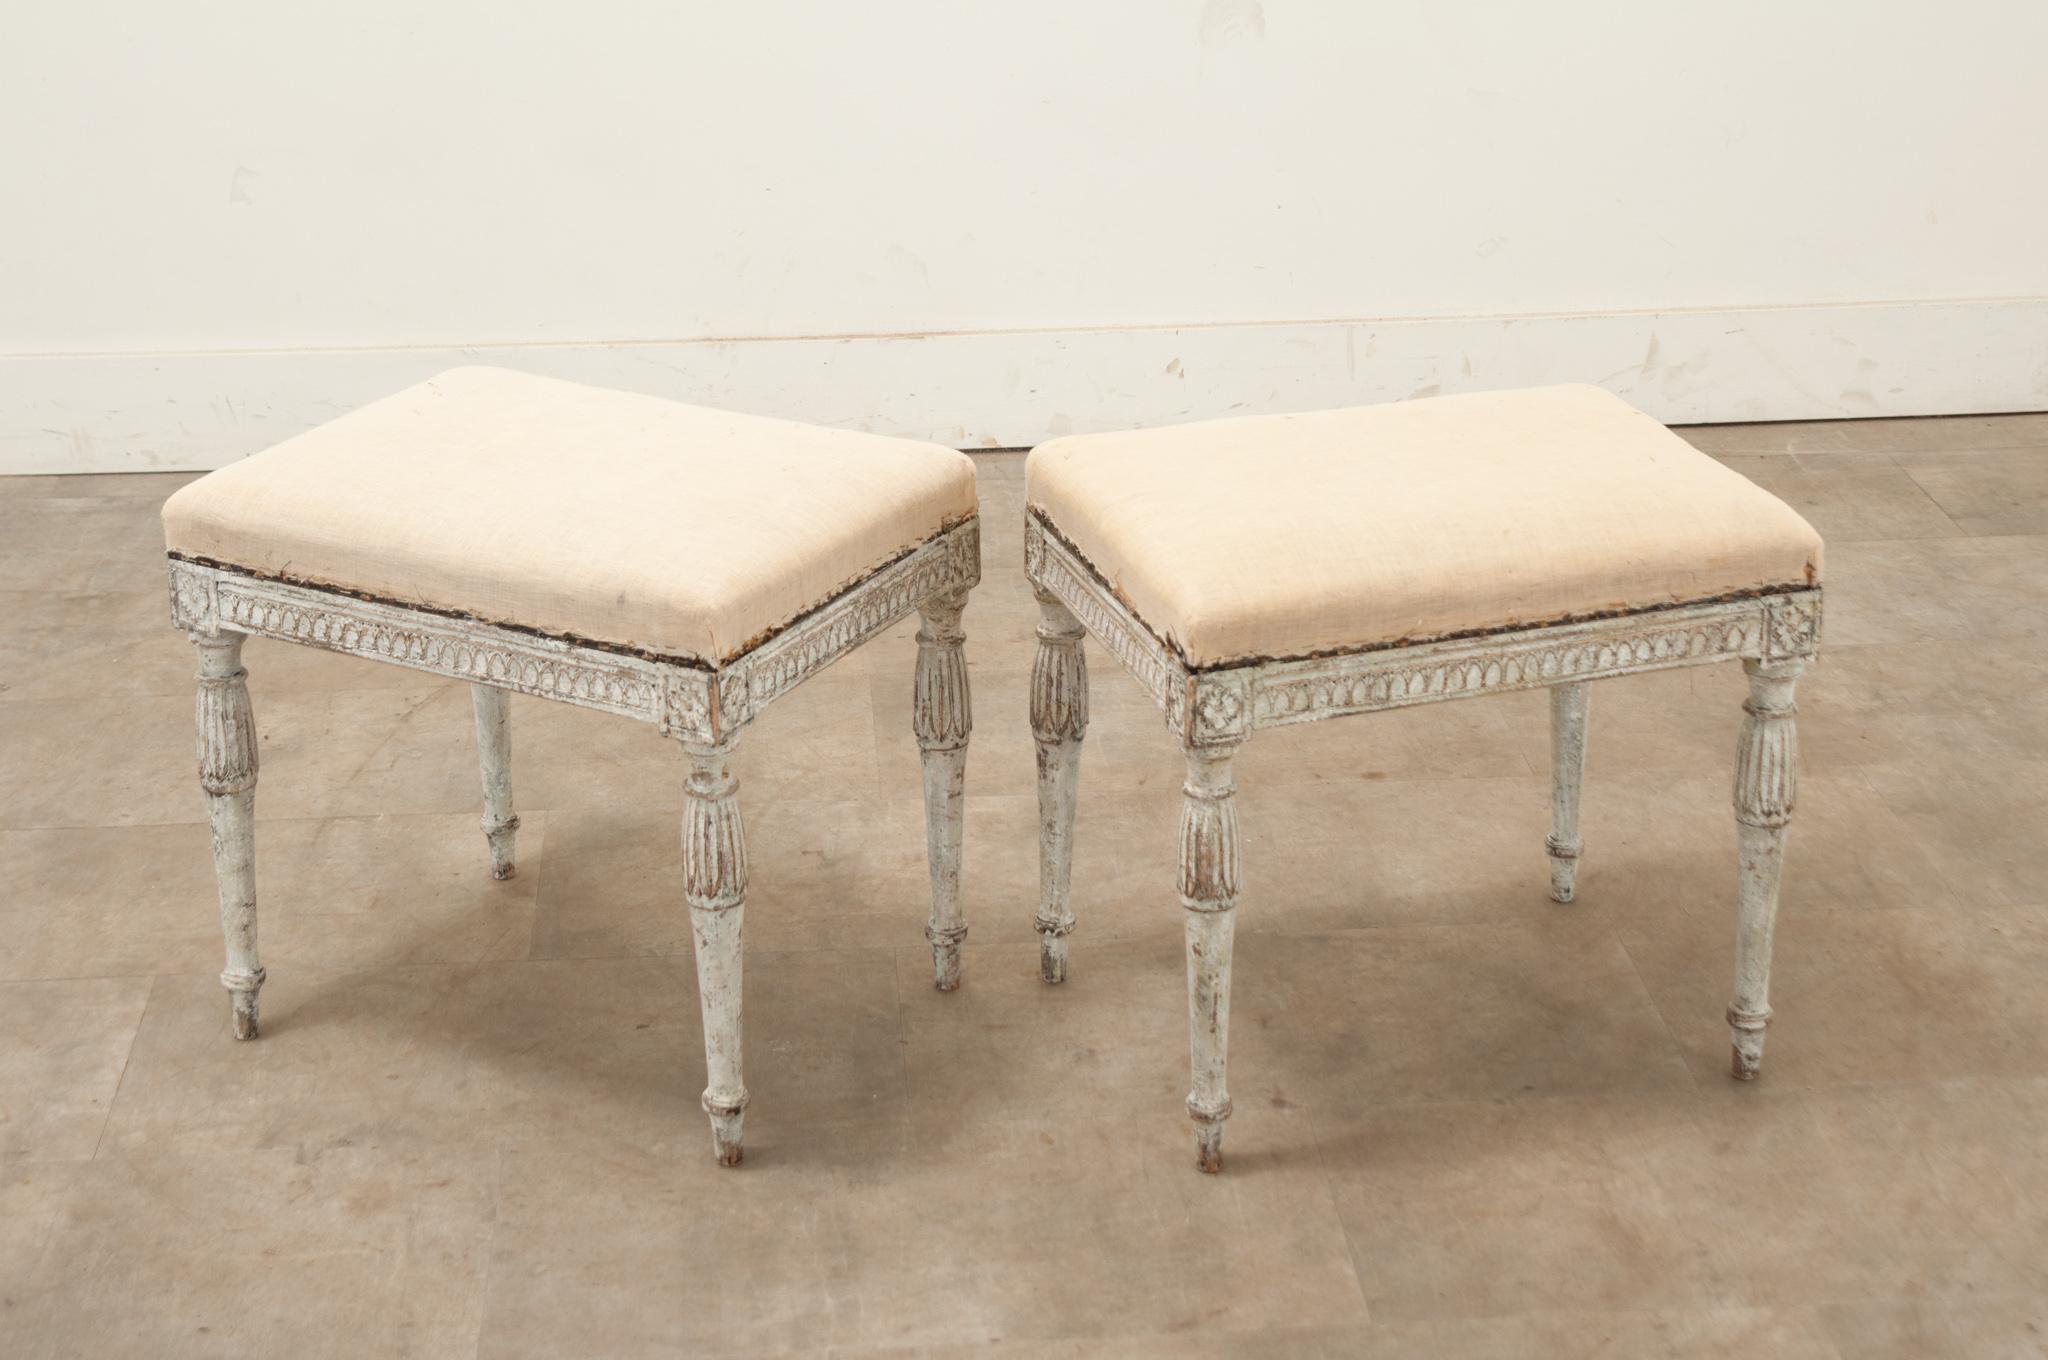 A Swedish pair of Louis XVI style benches made in the 1700’s. These classically styled benches have a neutral colored top cushion filled with horsehair, ready for a custom upholstery. The frames have hand-carved rosettes  in each corner and other